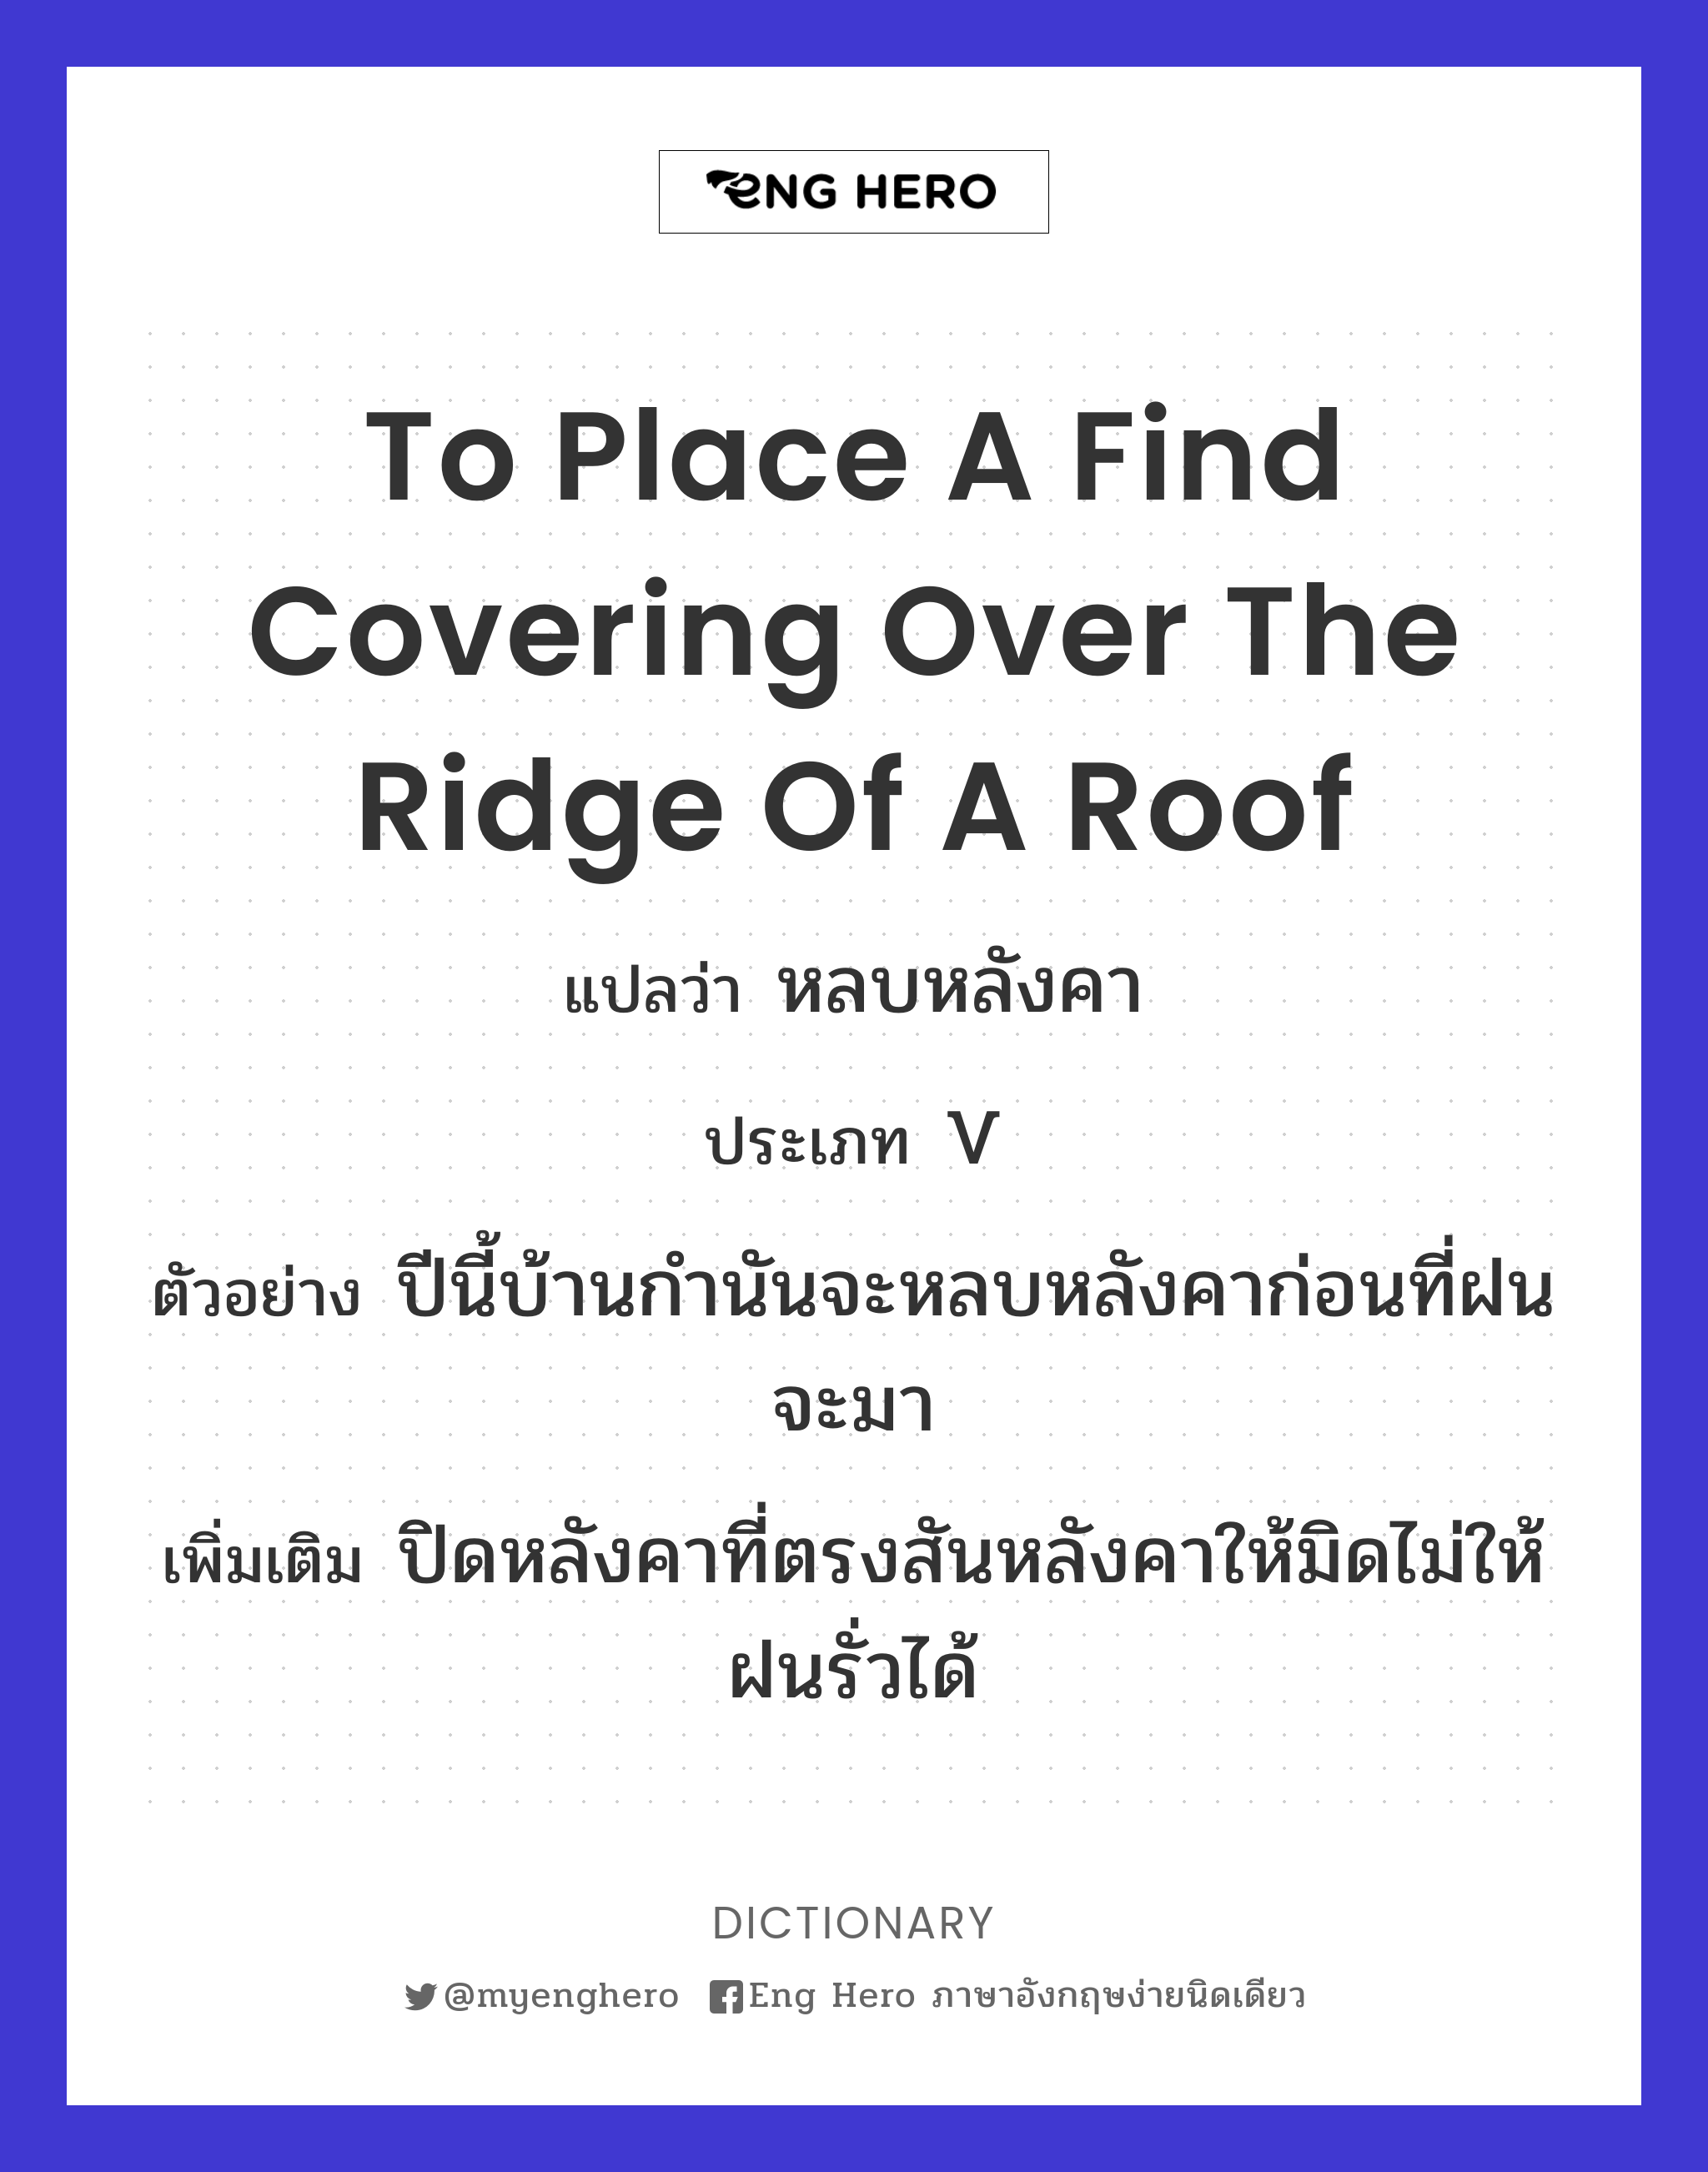 to place a find covering over the ridge of a roof